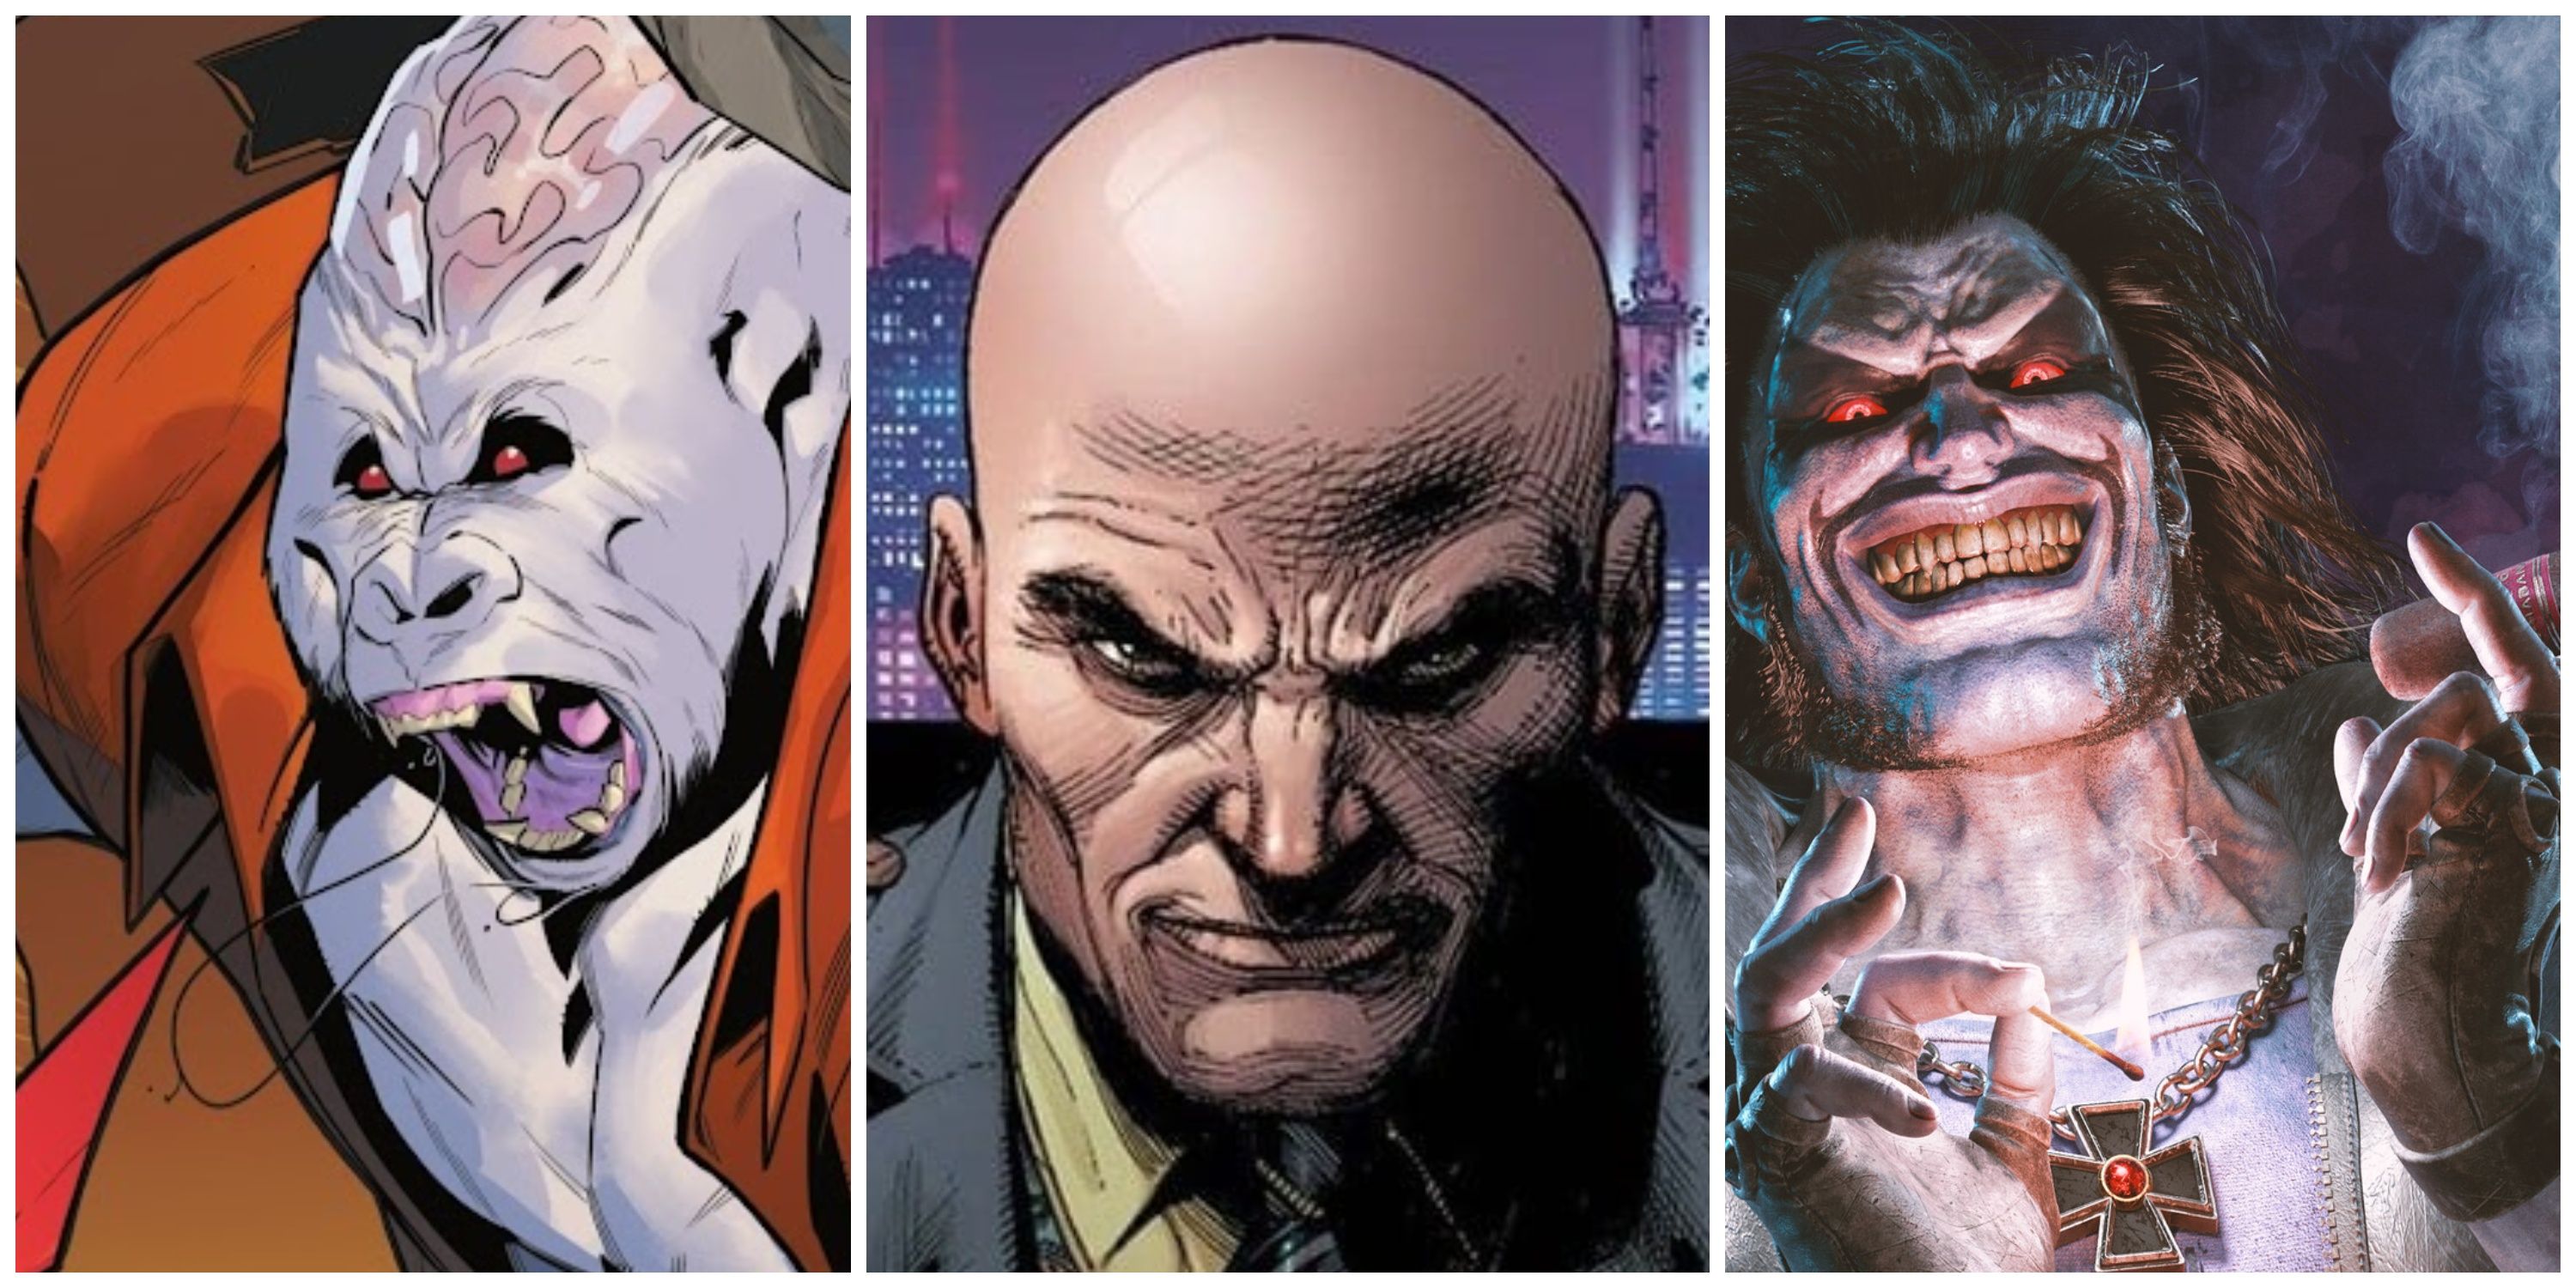 ultra-humanite, lex luthor and lobo from dc comics that could appear in superman: legacy